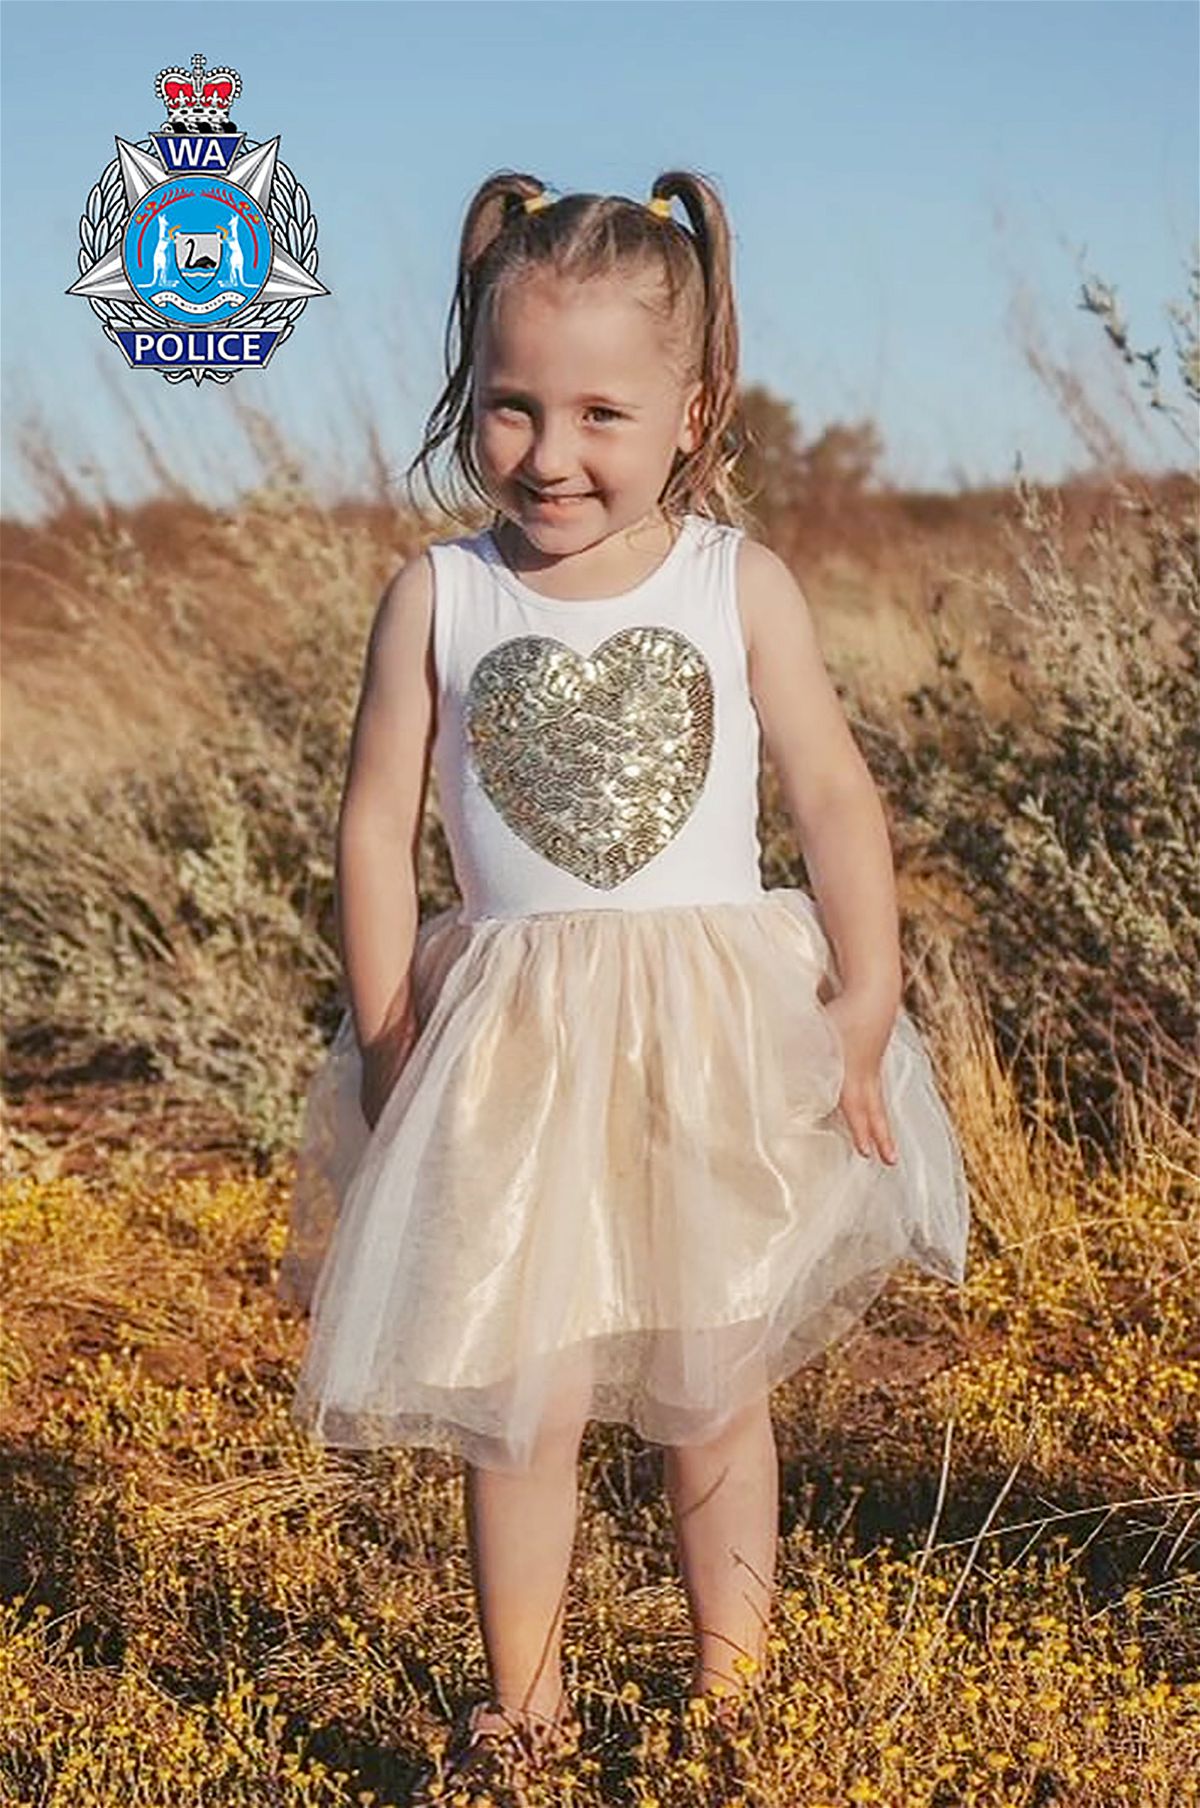 Australian authorities are searching for four-year-old Cleo Smith